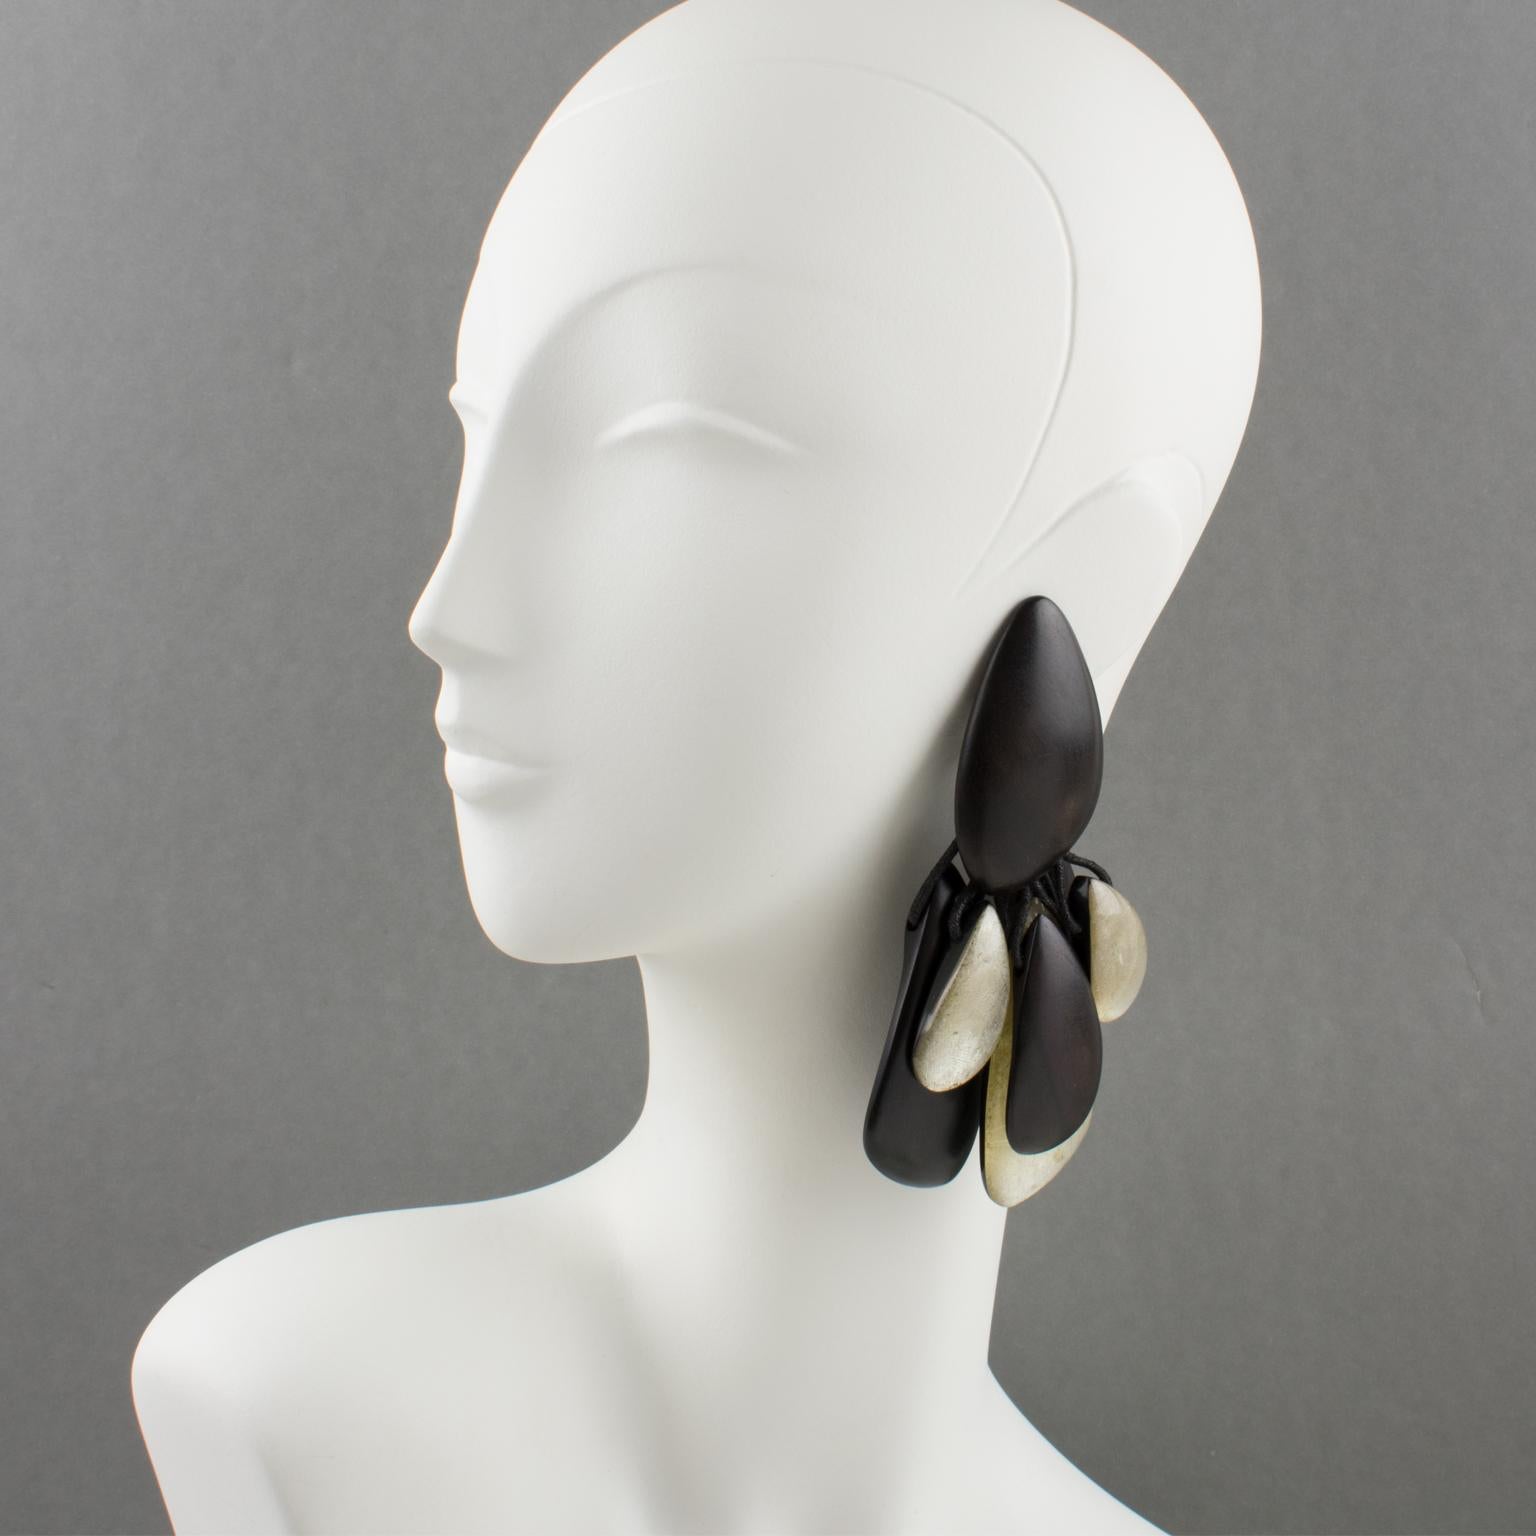 Gerda Lyngaard for Monies designed those stunning oversized hand-made clip-on earrings. The dangling pebble shape boasts charms in natural Ebony wood and resin. The resin pebbles are black on the background and pearlized on the front with silver